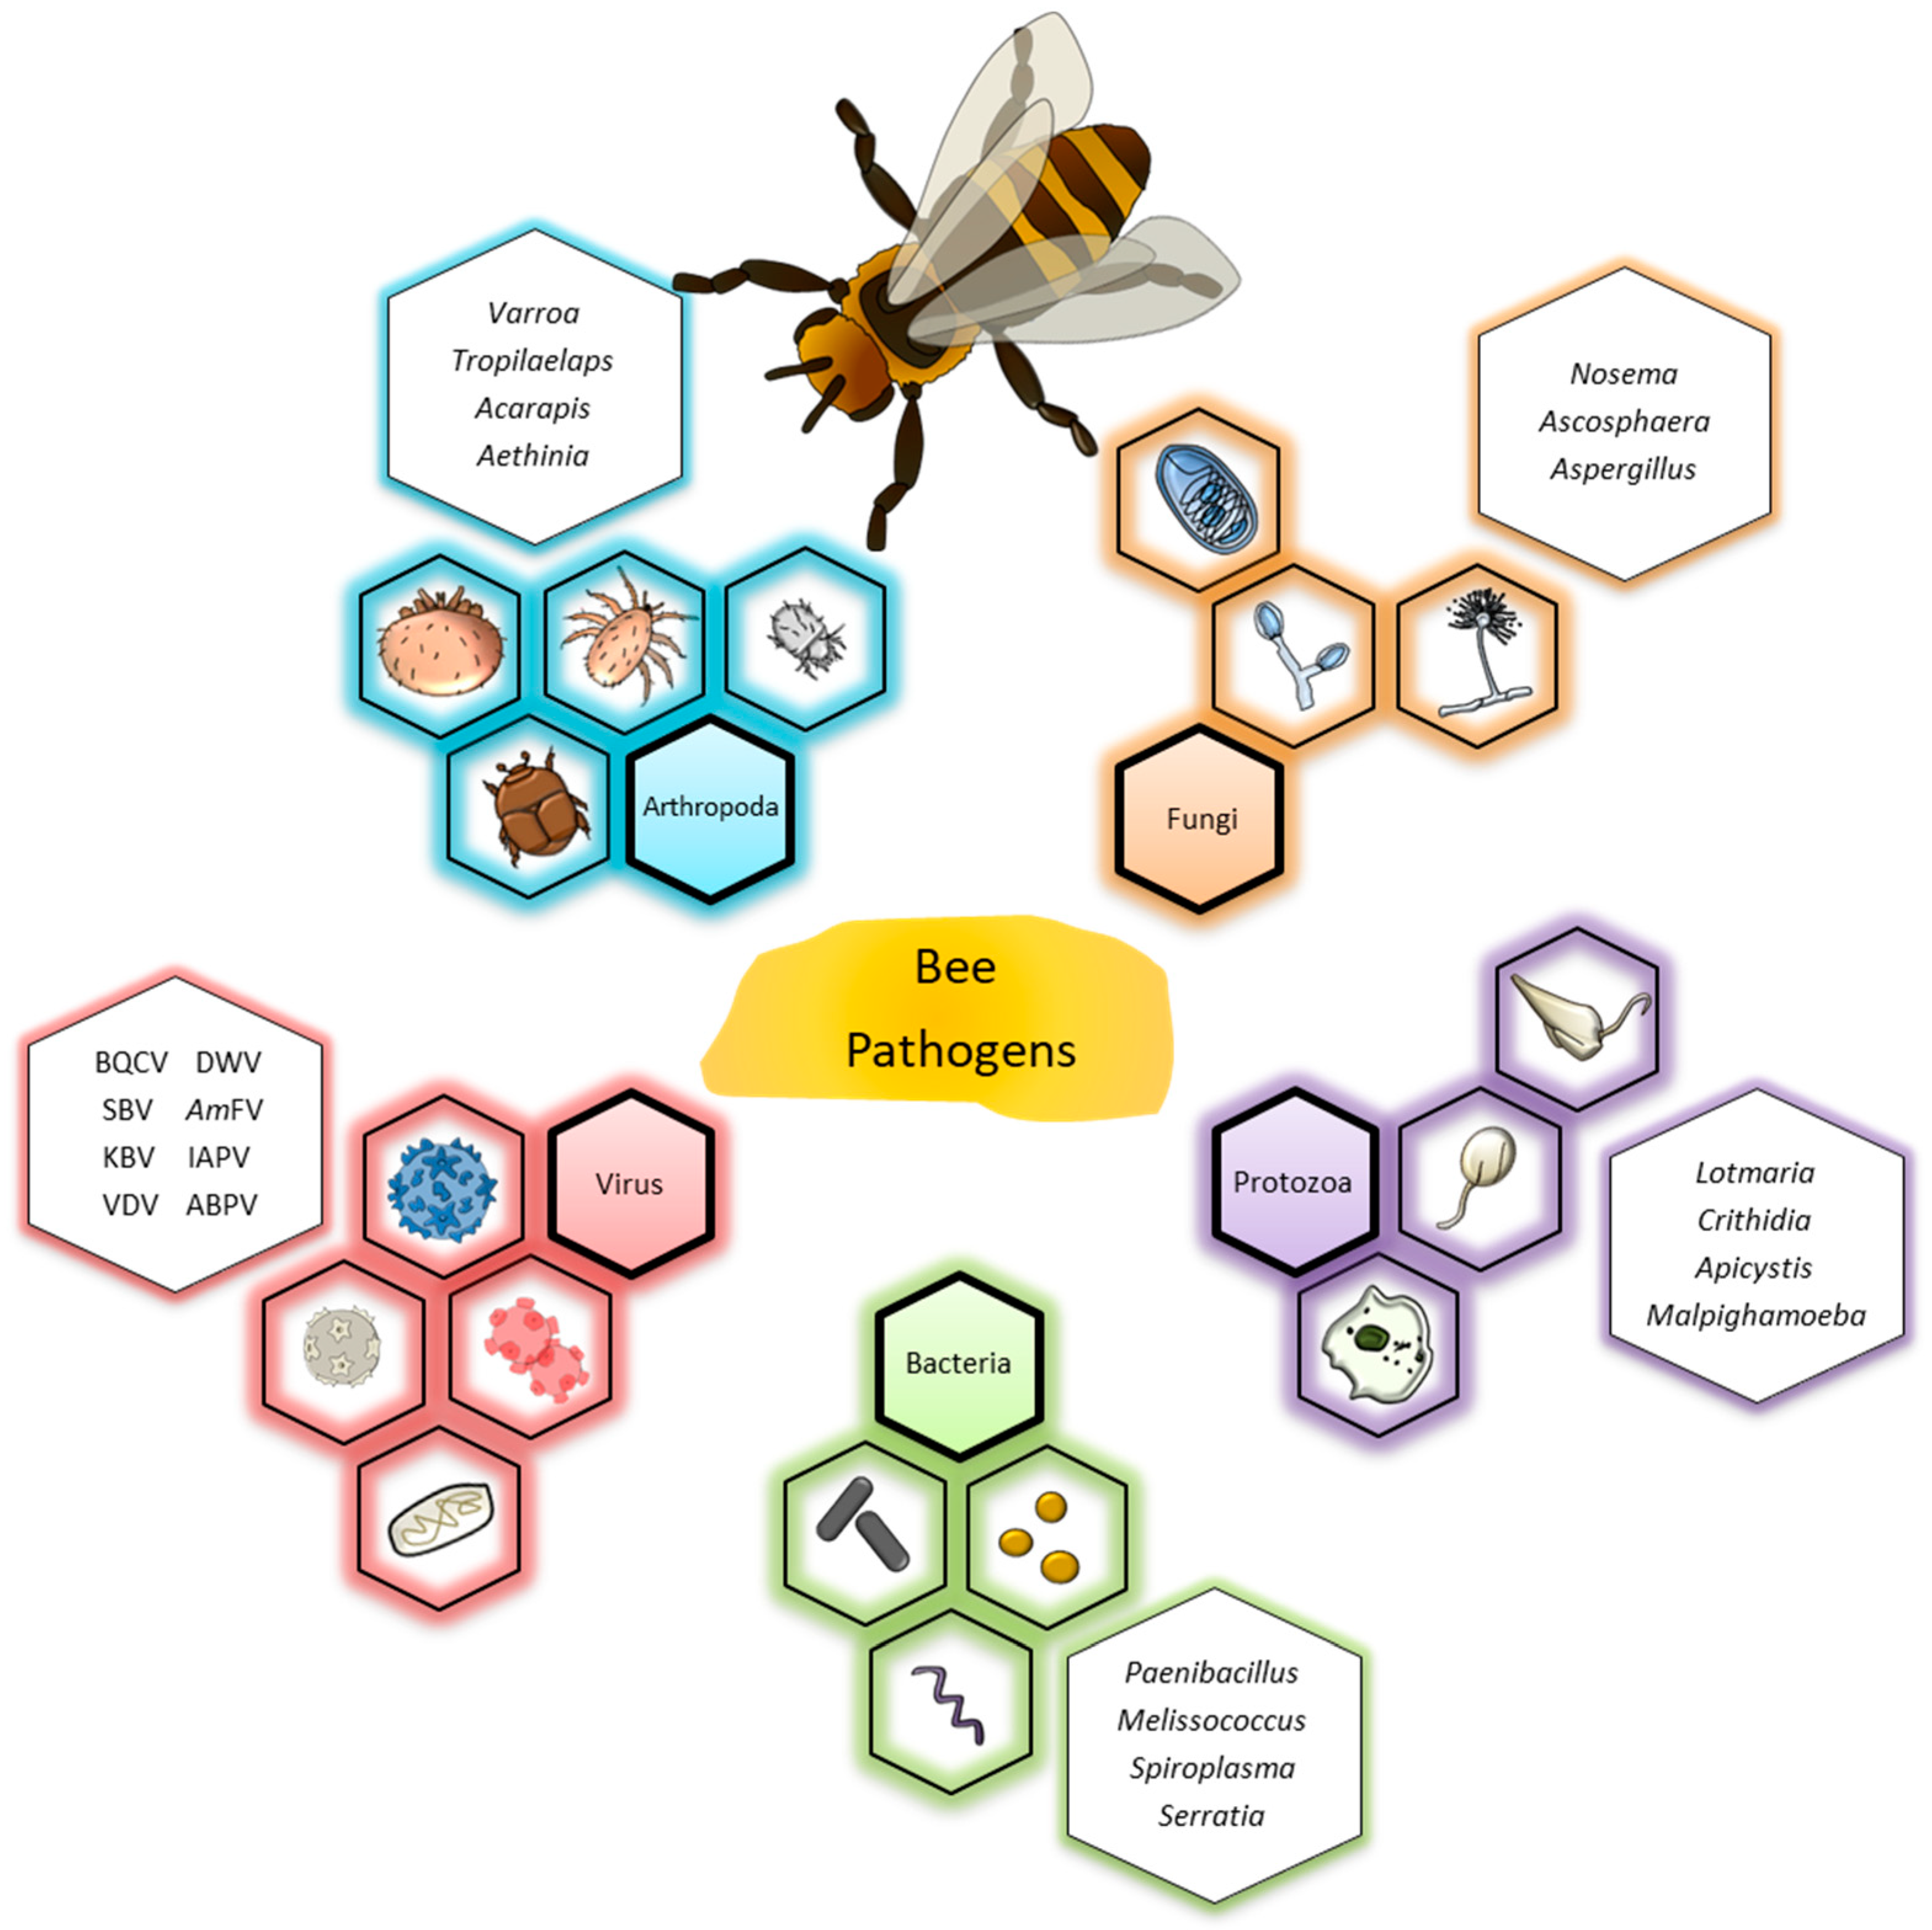 Ways to Differentiate Honey Bees